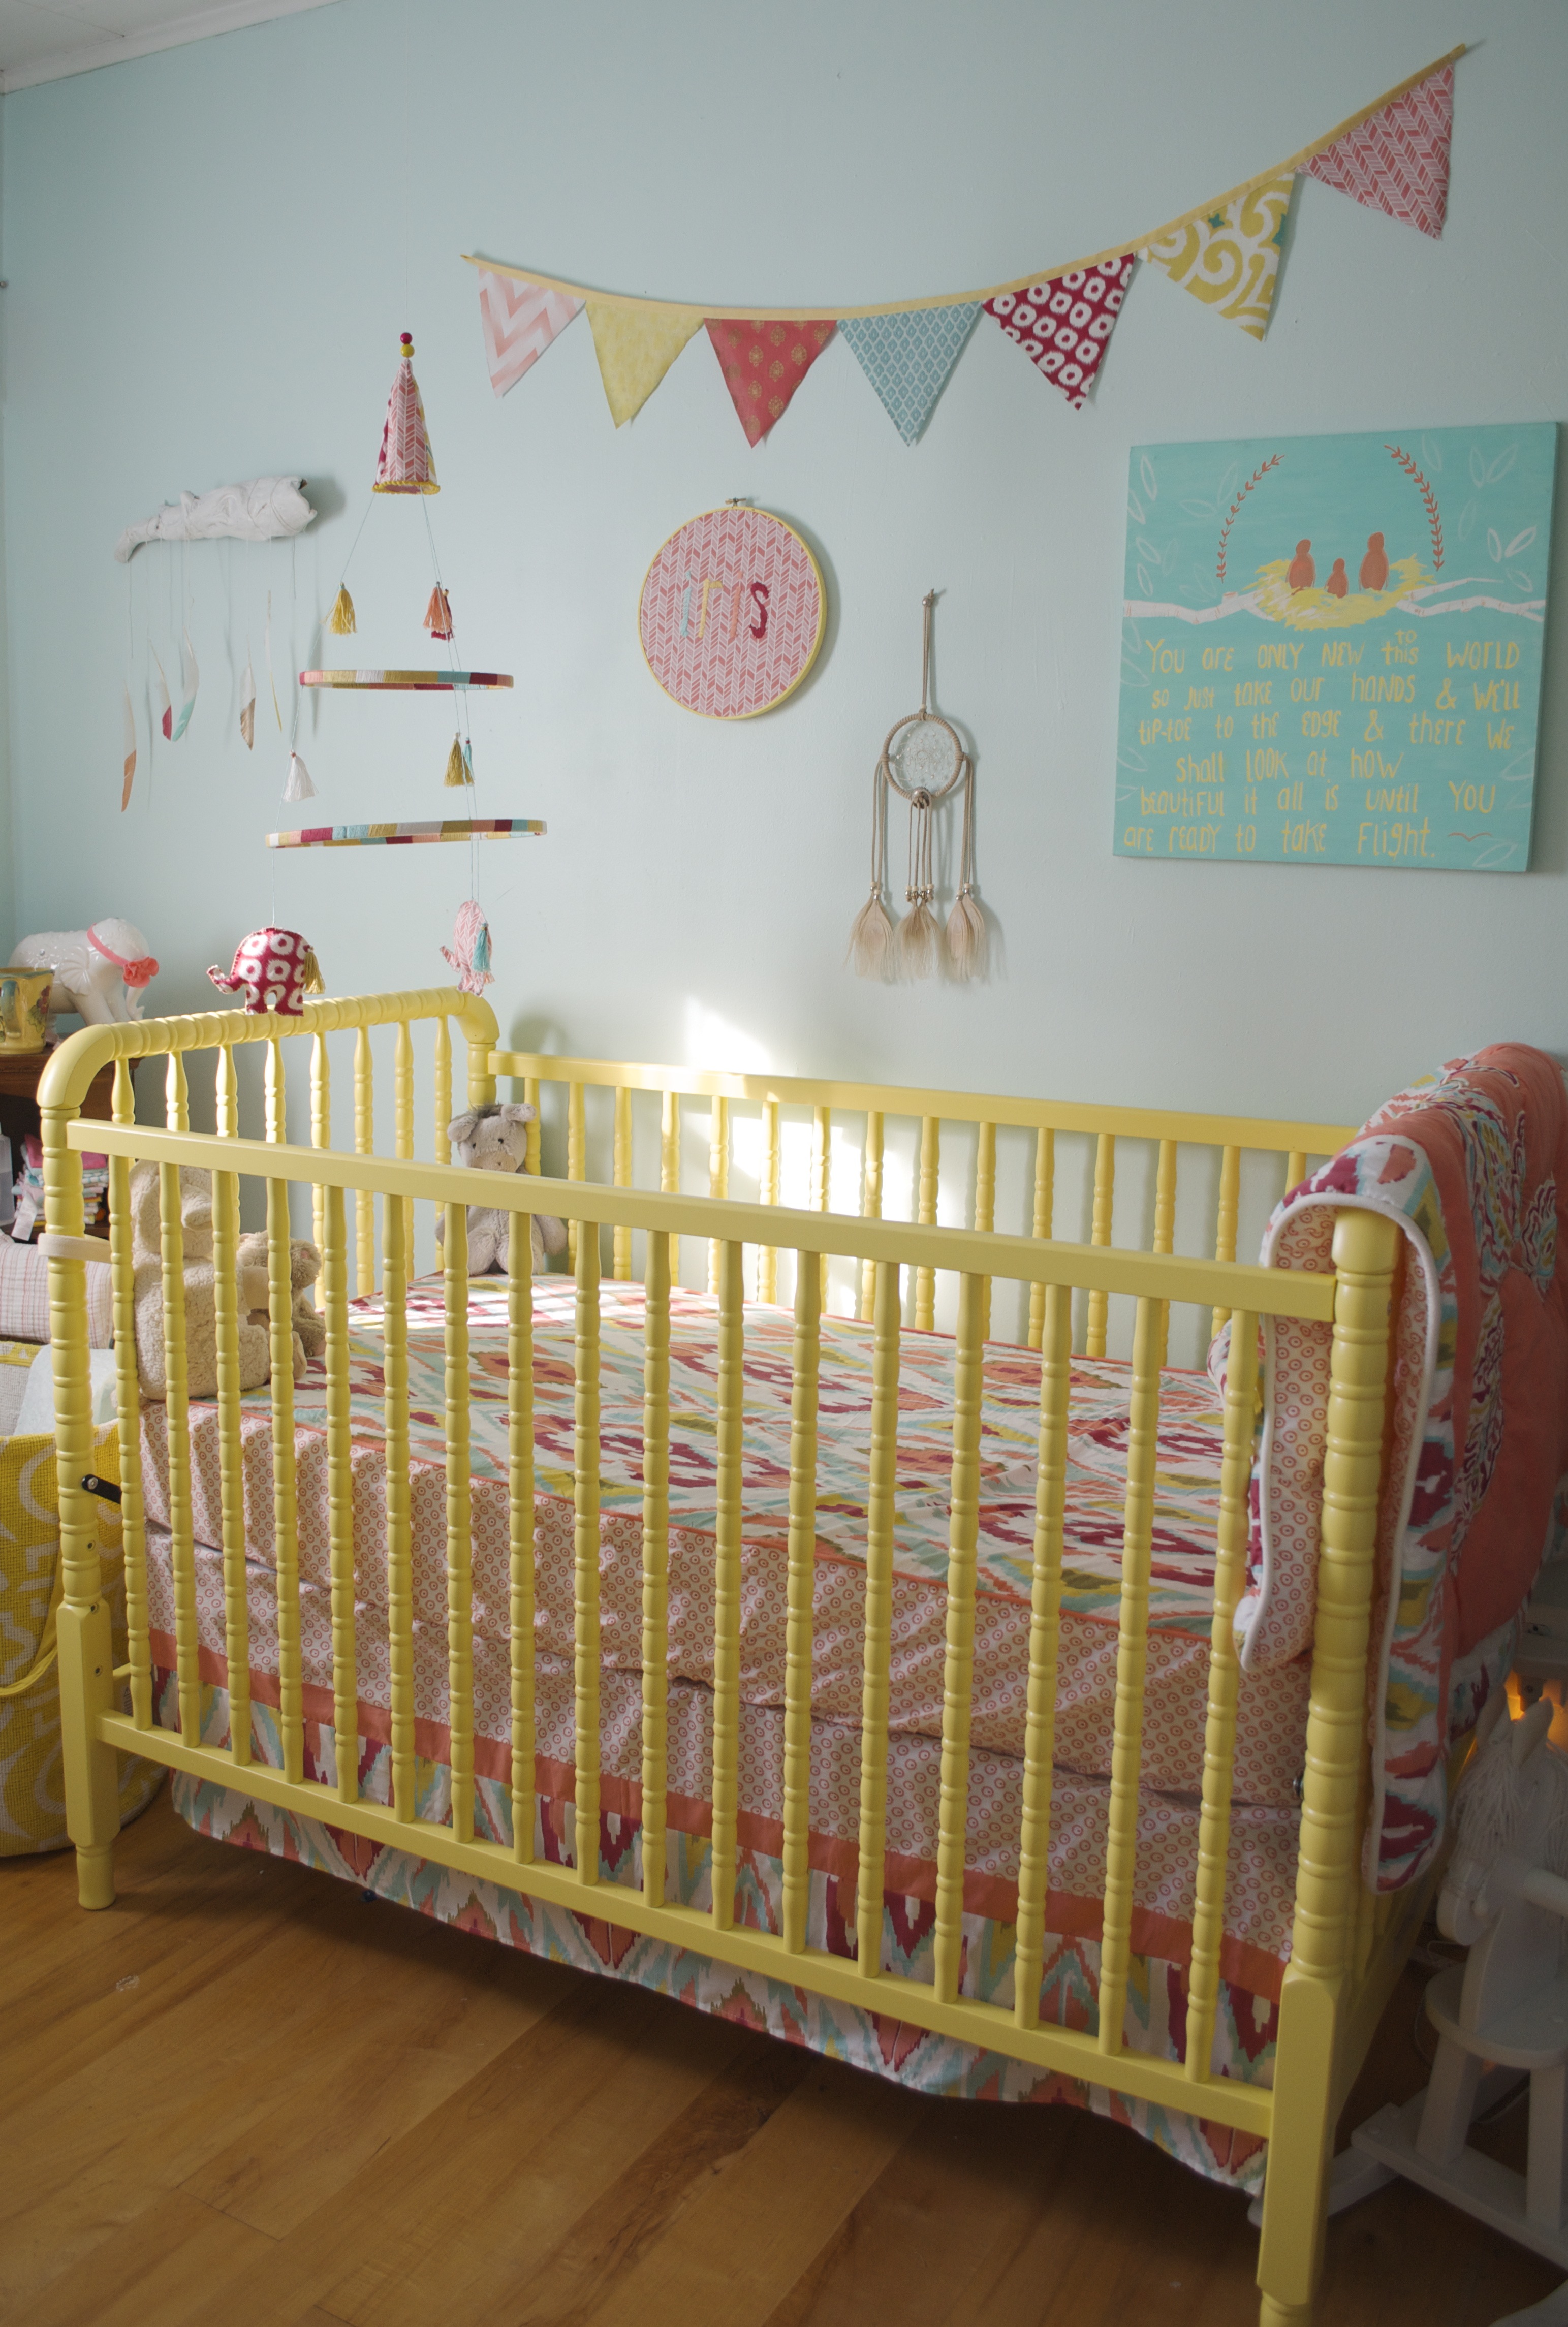 Yellow Jenny Lind Crib in this Colorful Boho Nursery